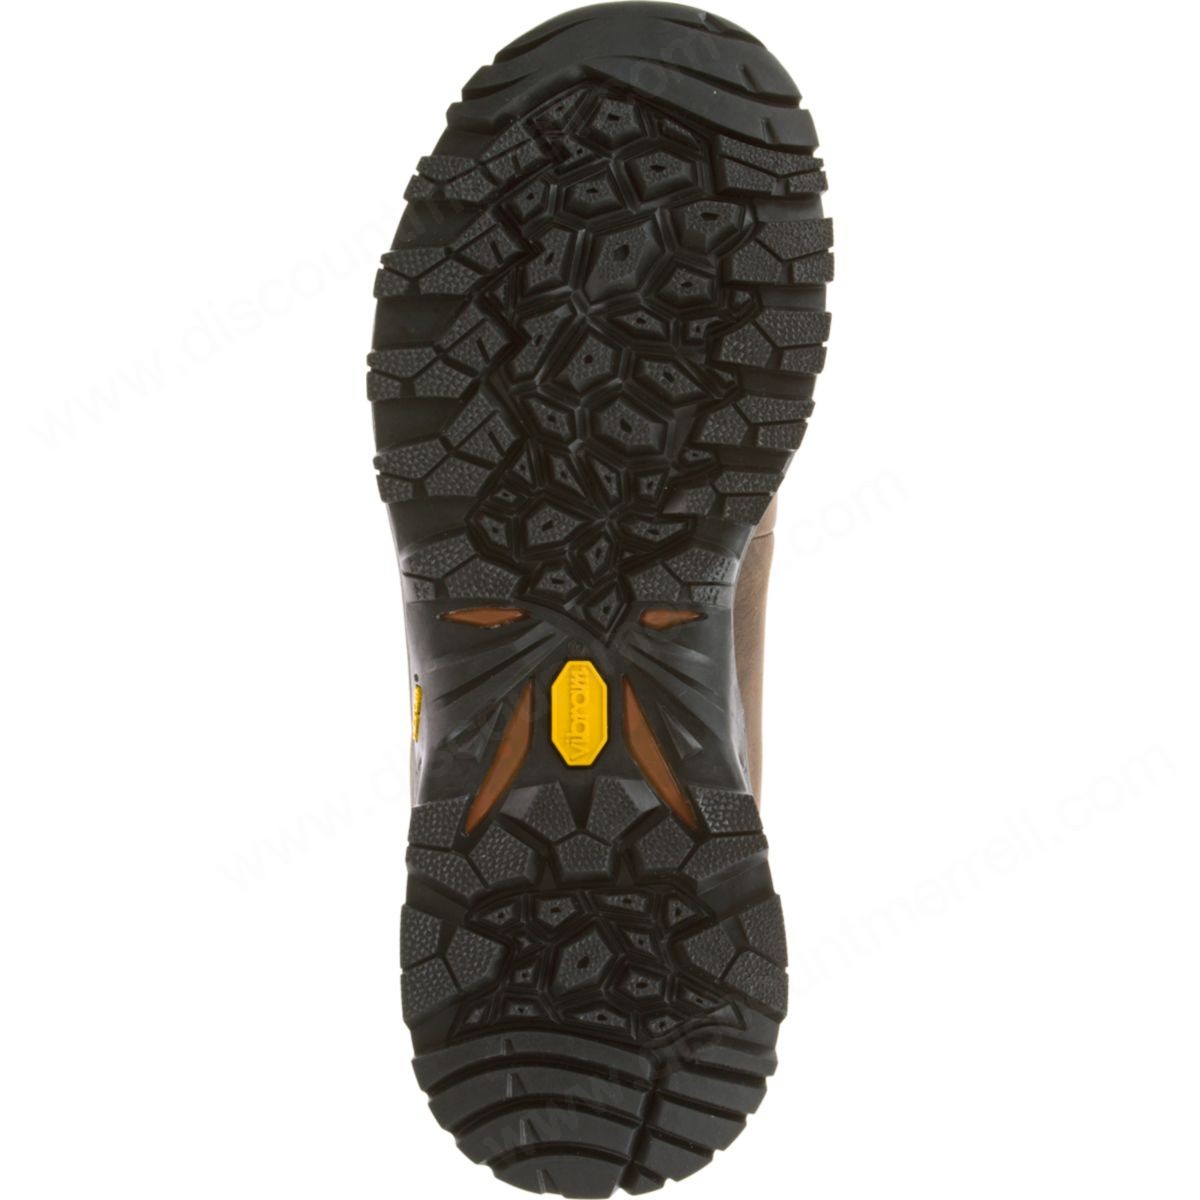 Merrell Man's Phaserbound Waterproof Clay - -1